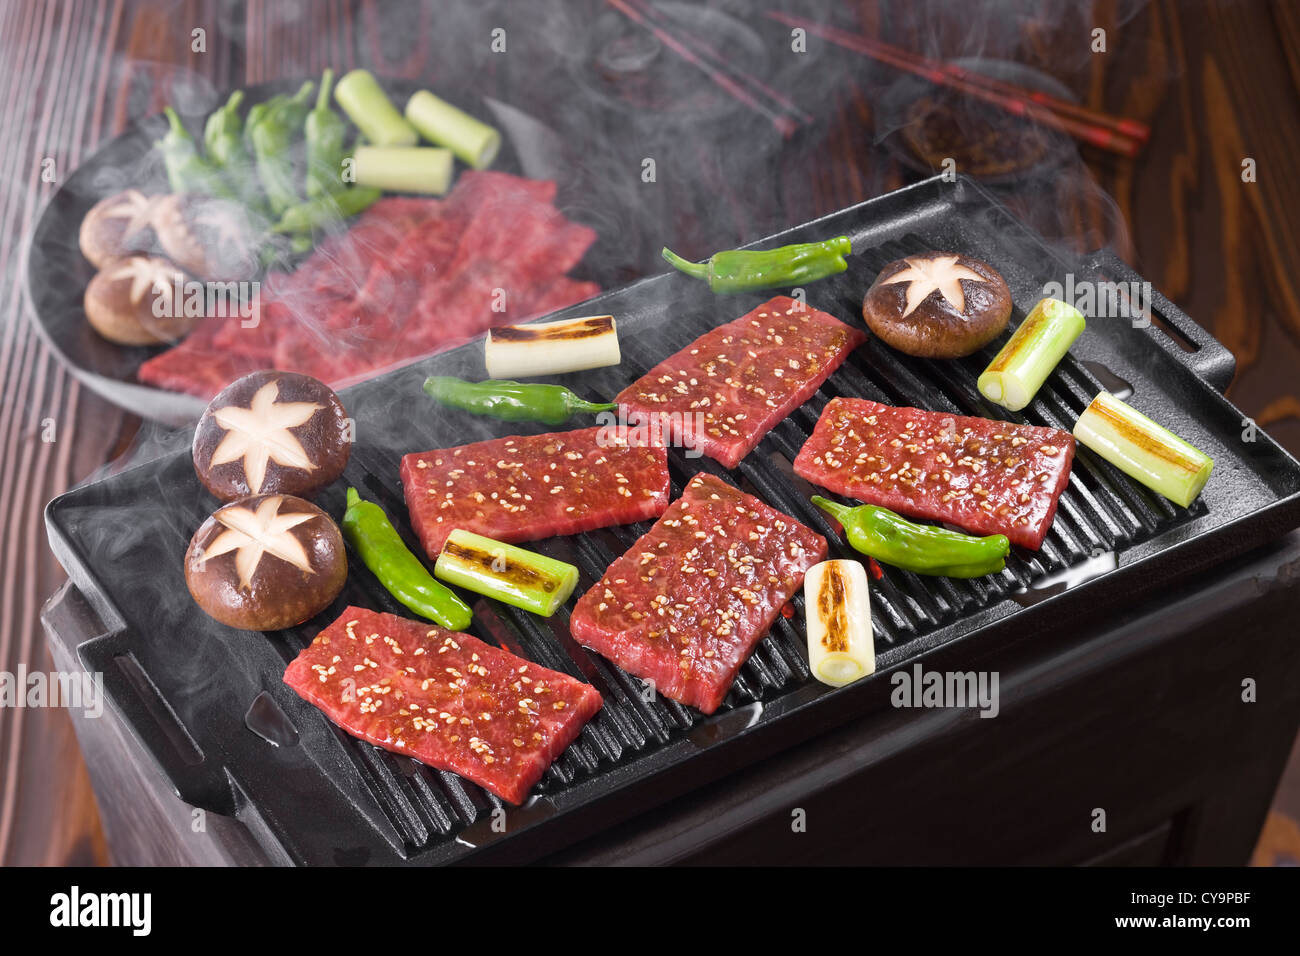 Korean Barbecue on Grill Plate Stock Photo - Alamy